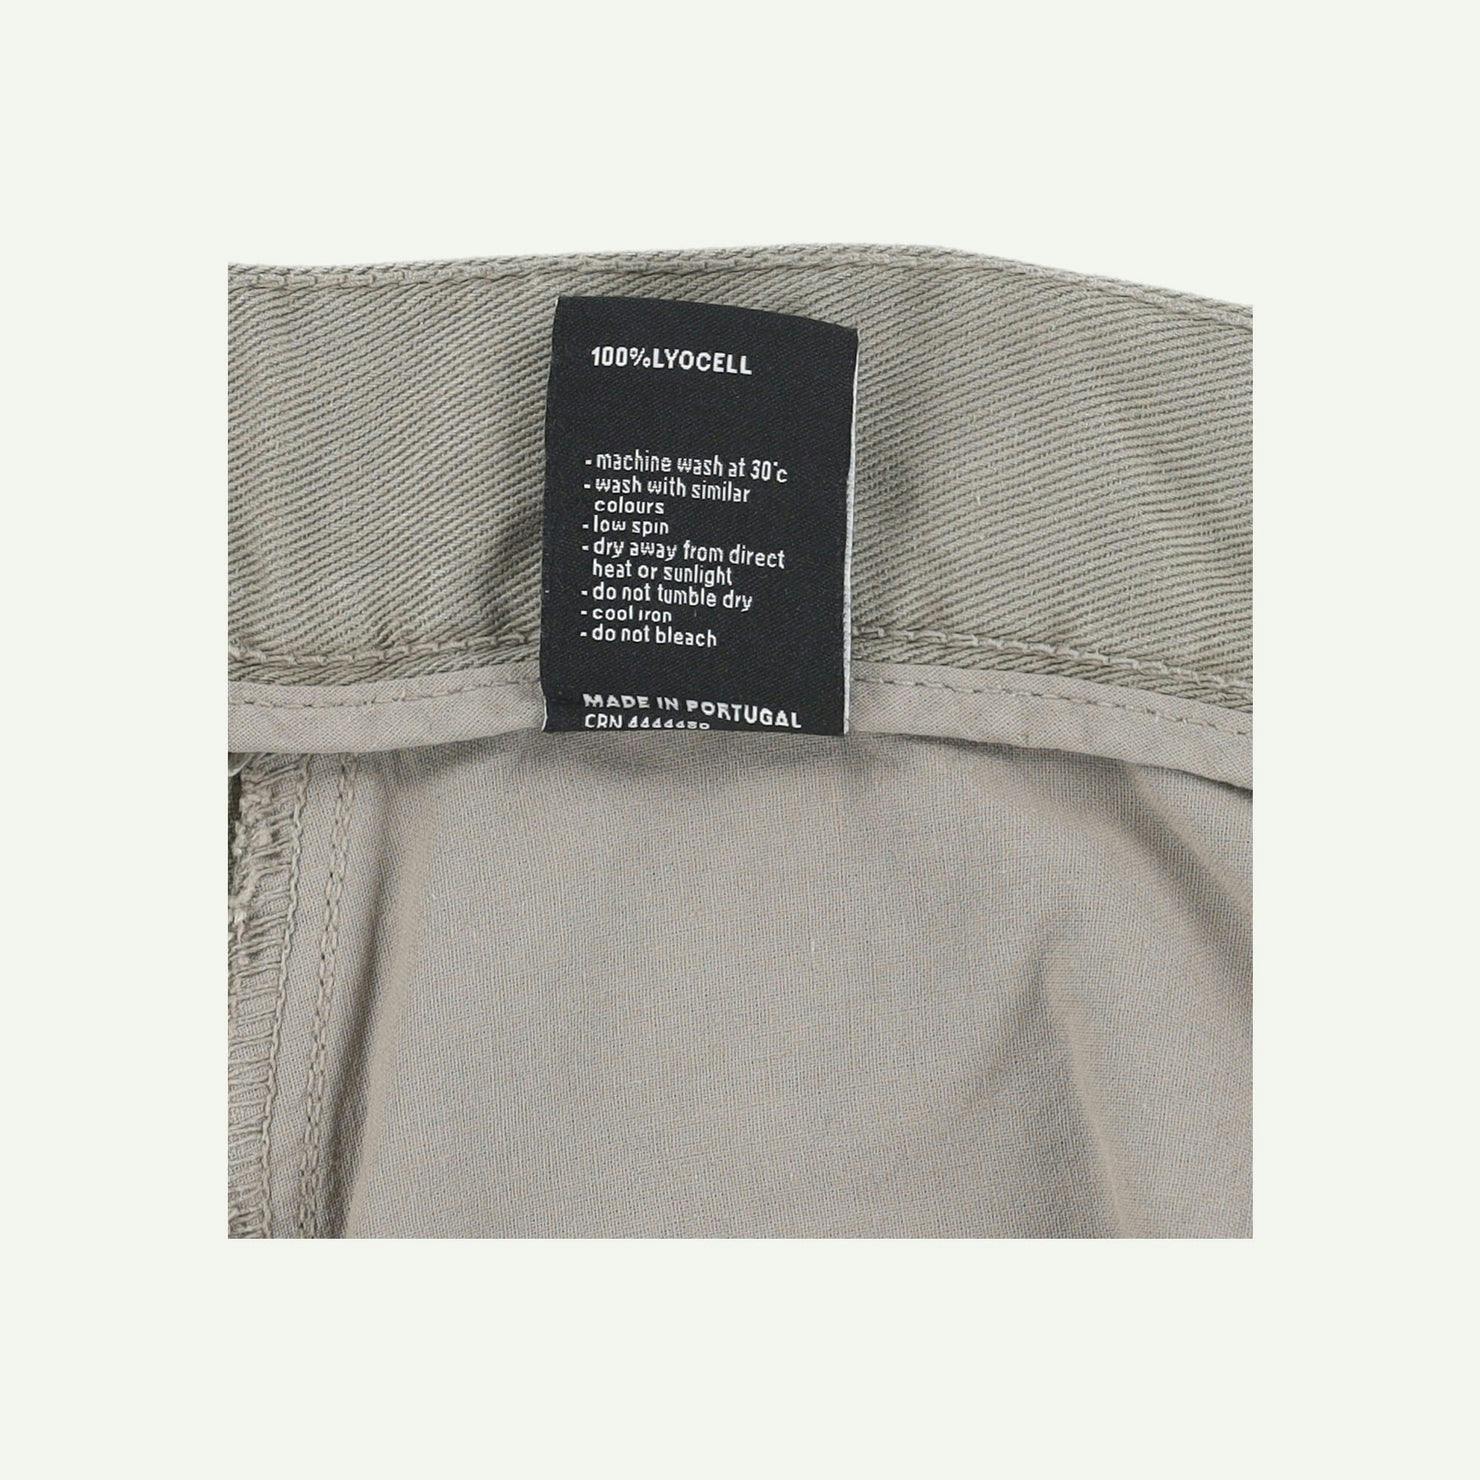 Finisterre Pre-loved Grey Trousers